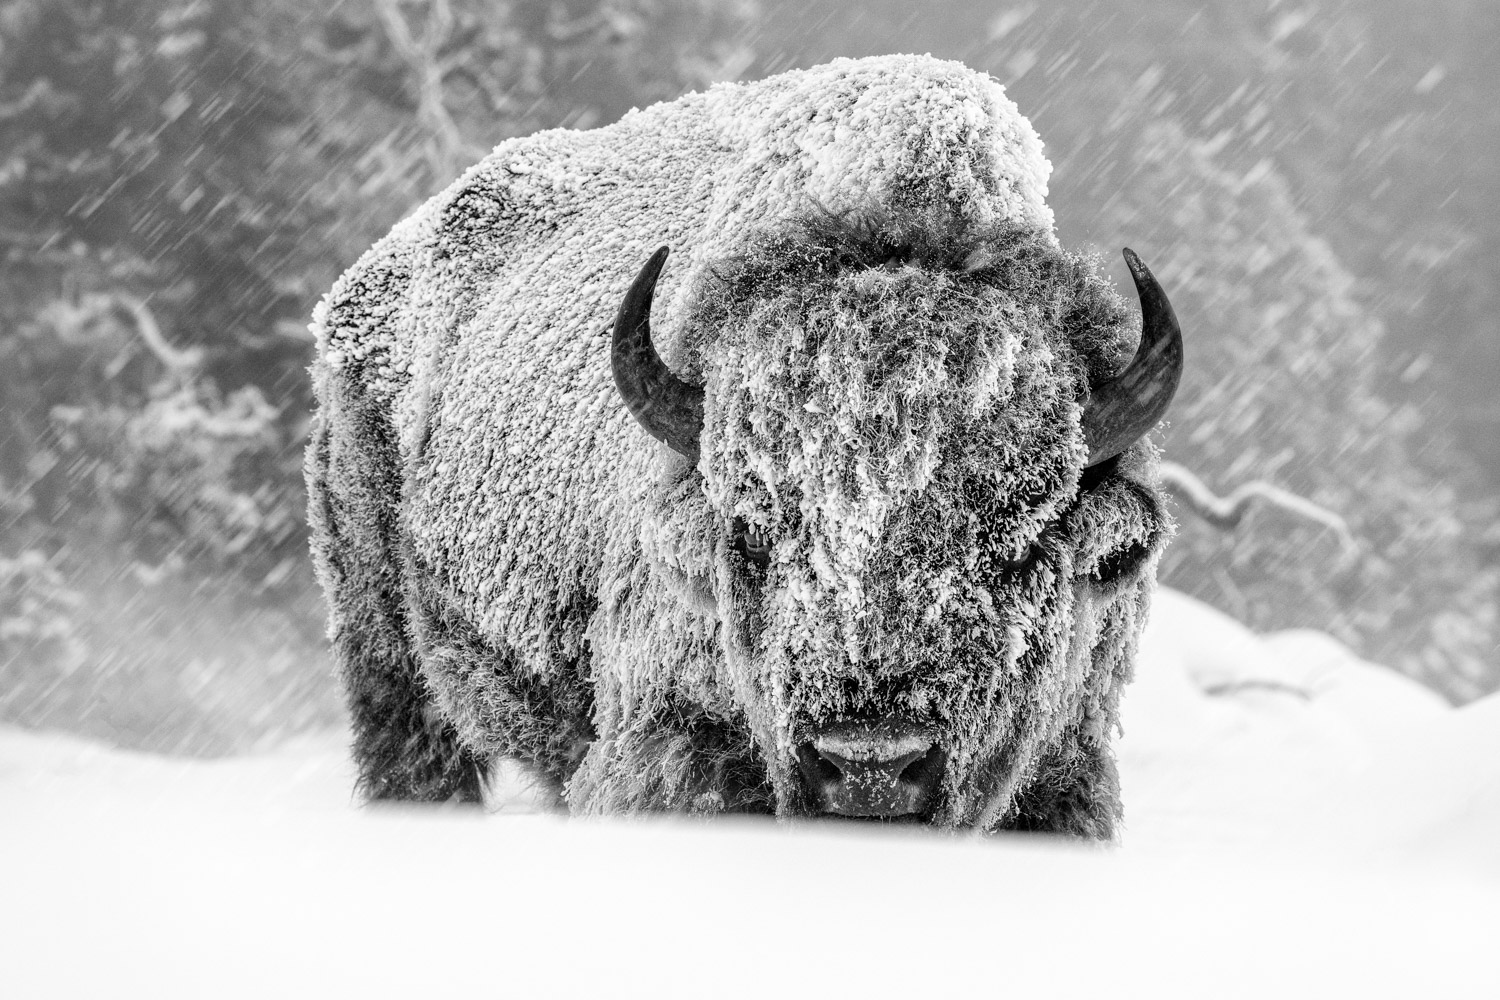 Bison in a snow storm